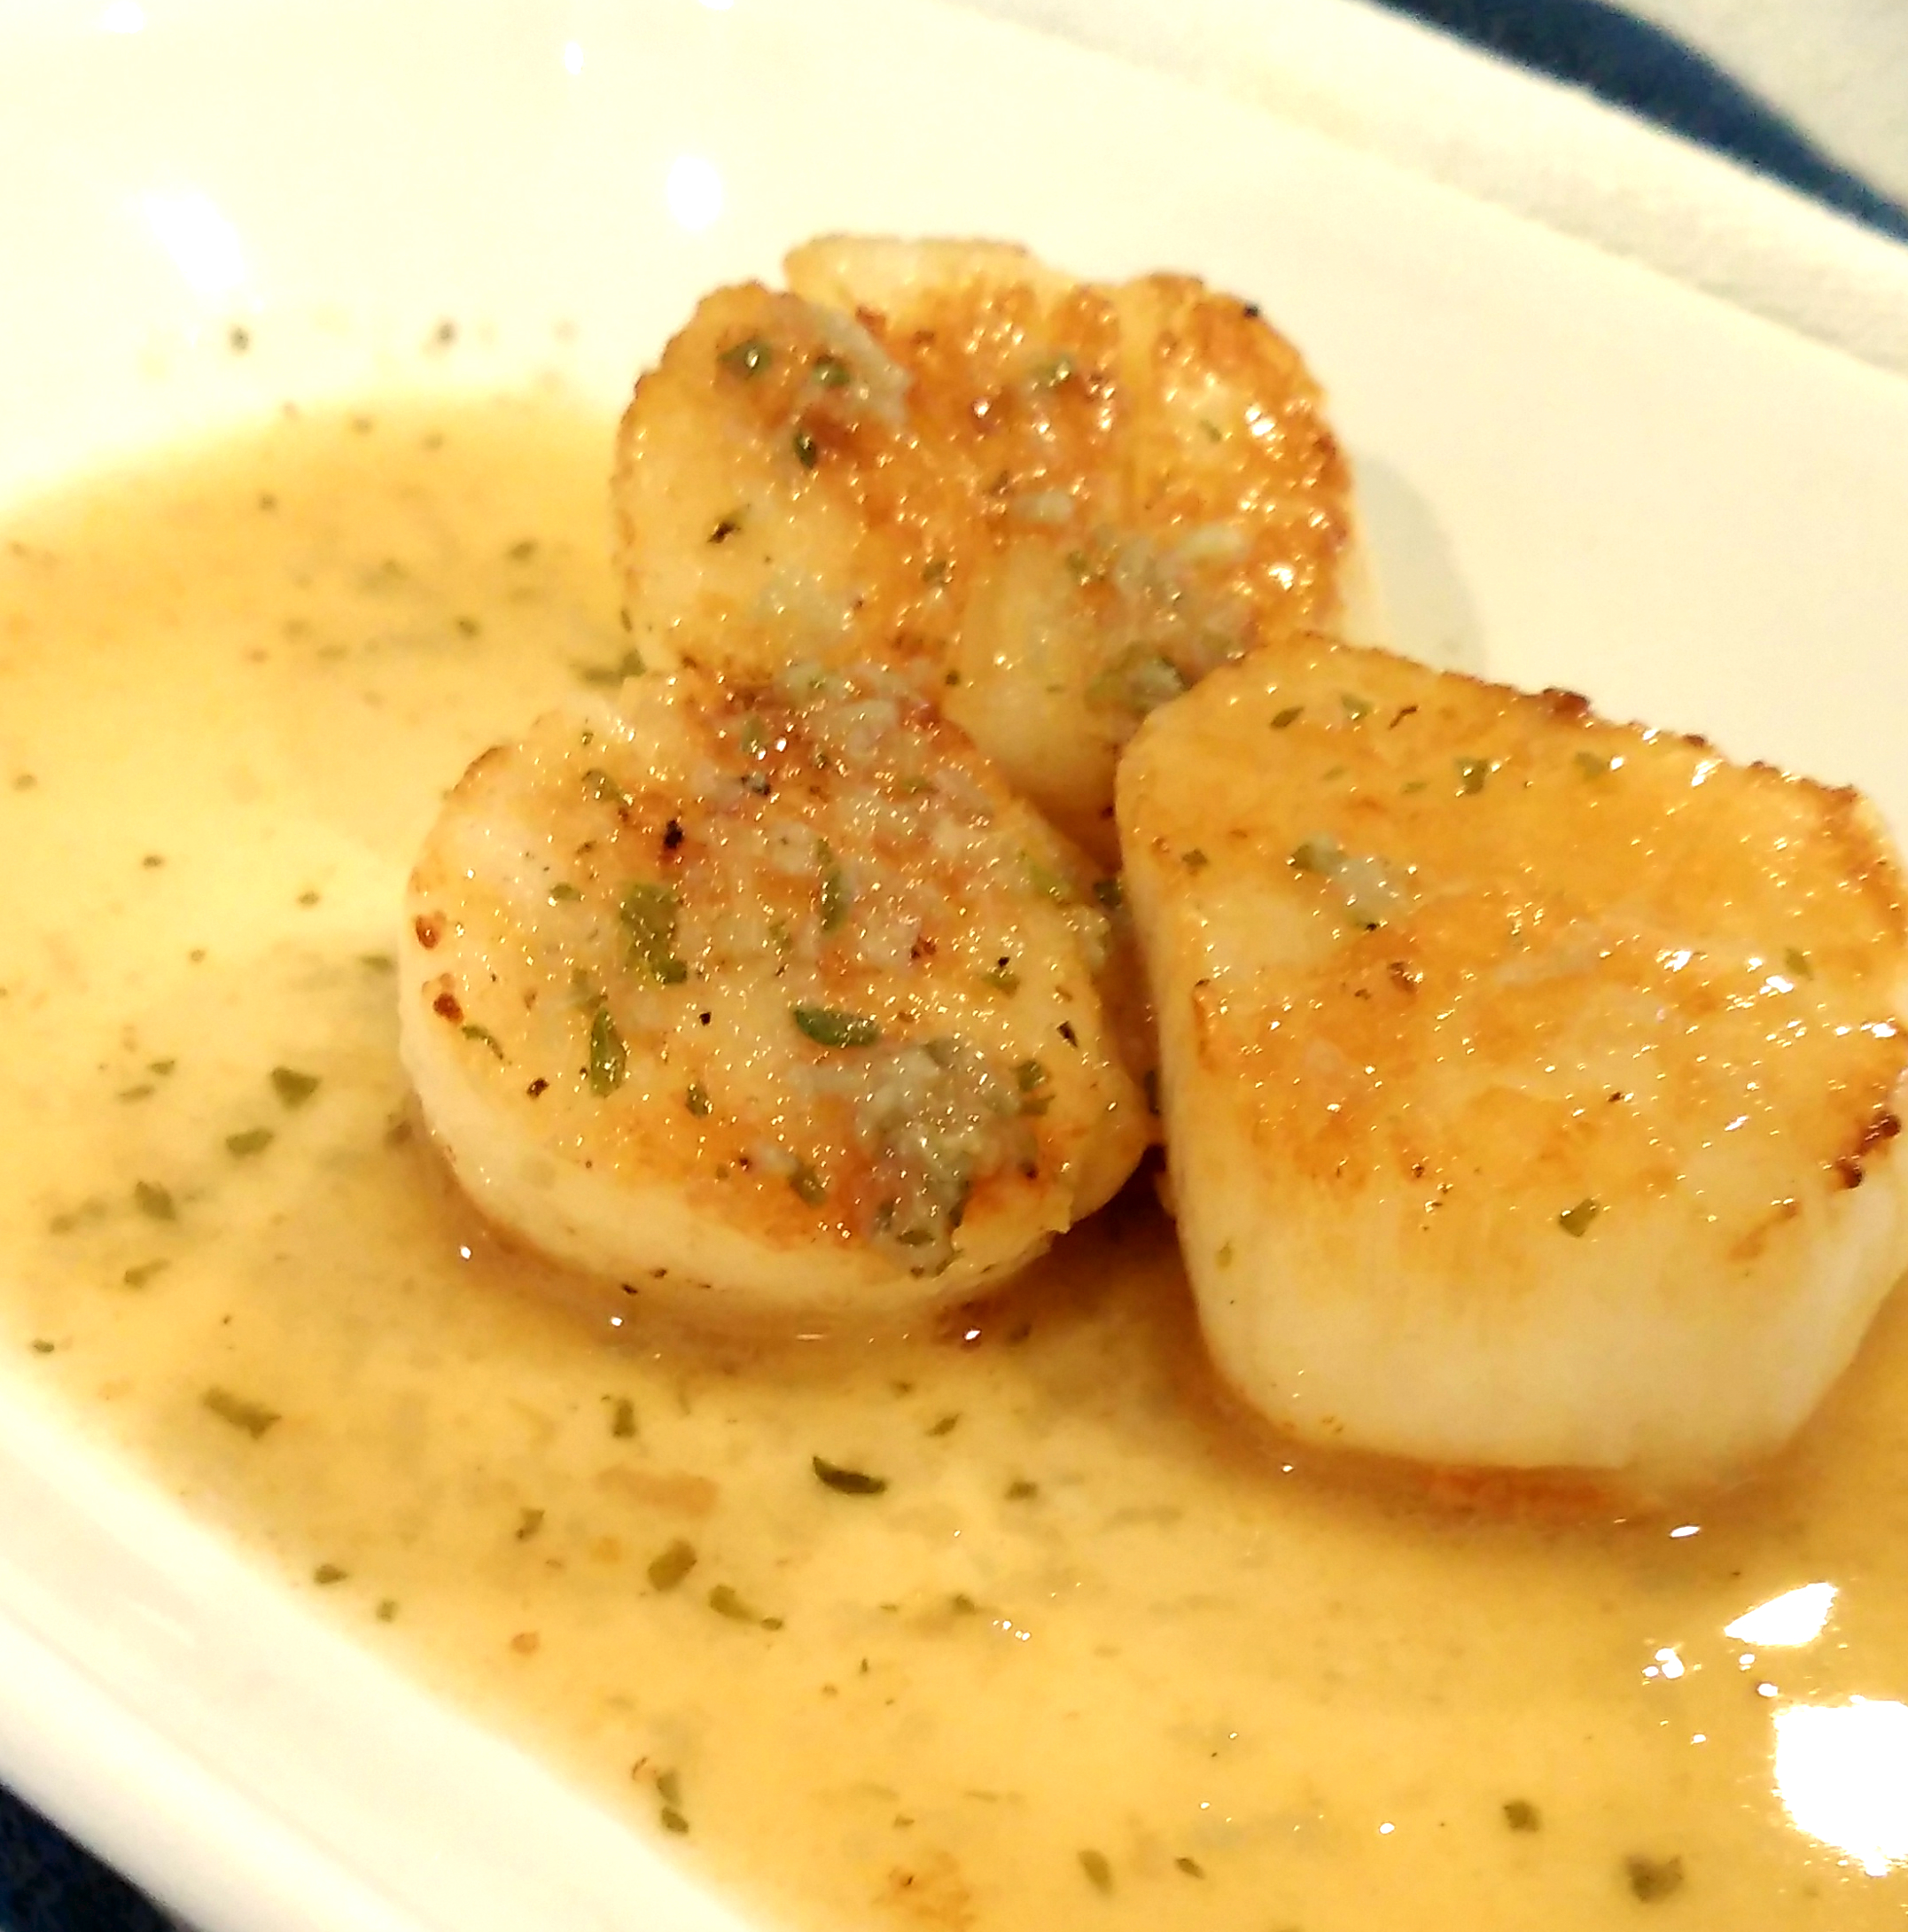 Sous Vide Scallops with Garlic and Lemon Butter